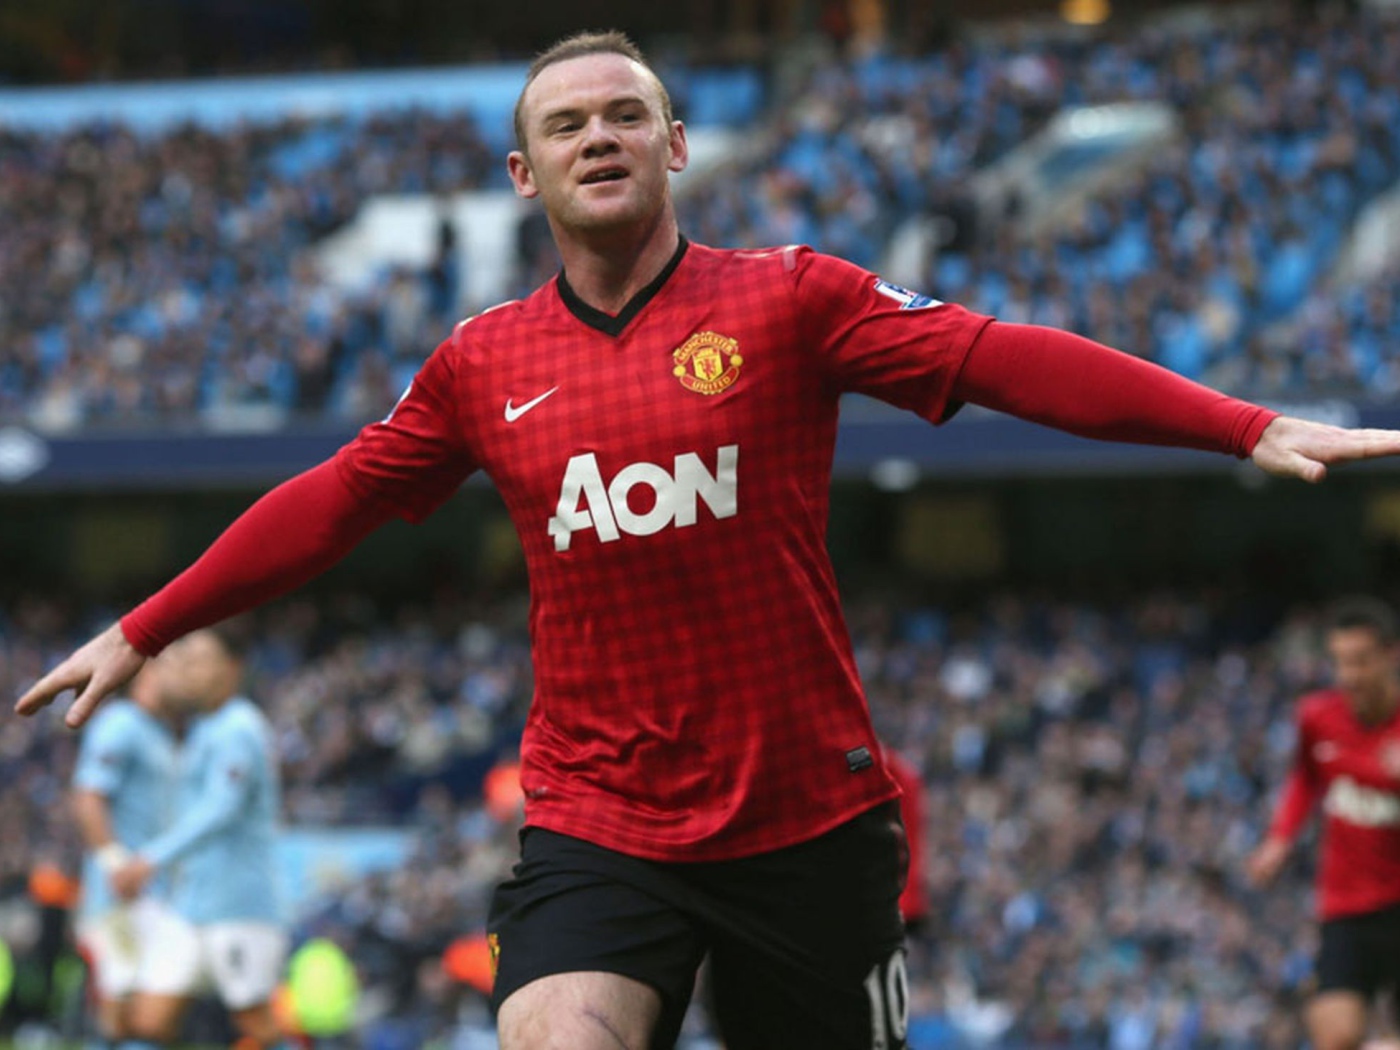 The forward of Manchester United Wayne Rooney